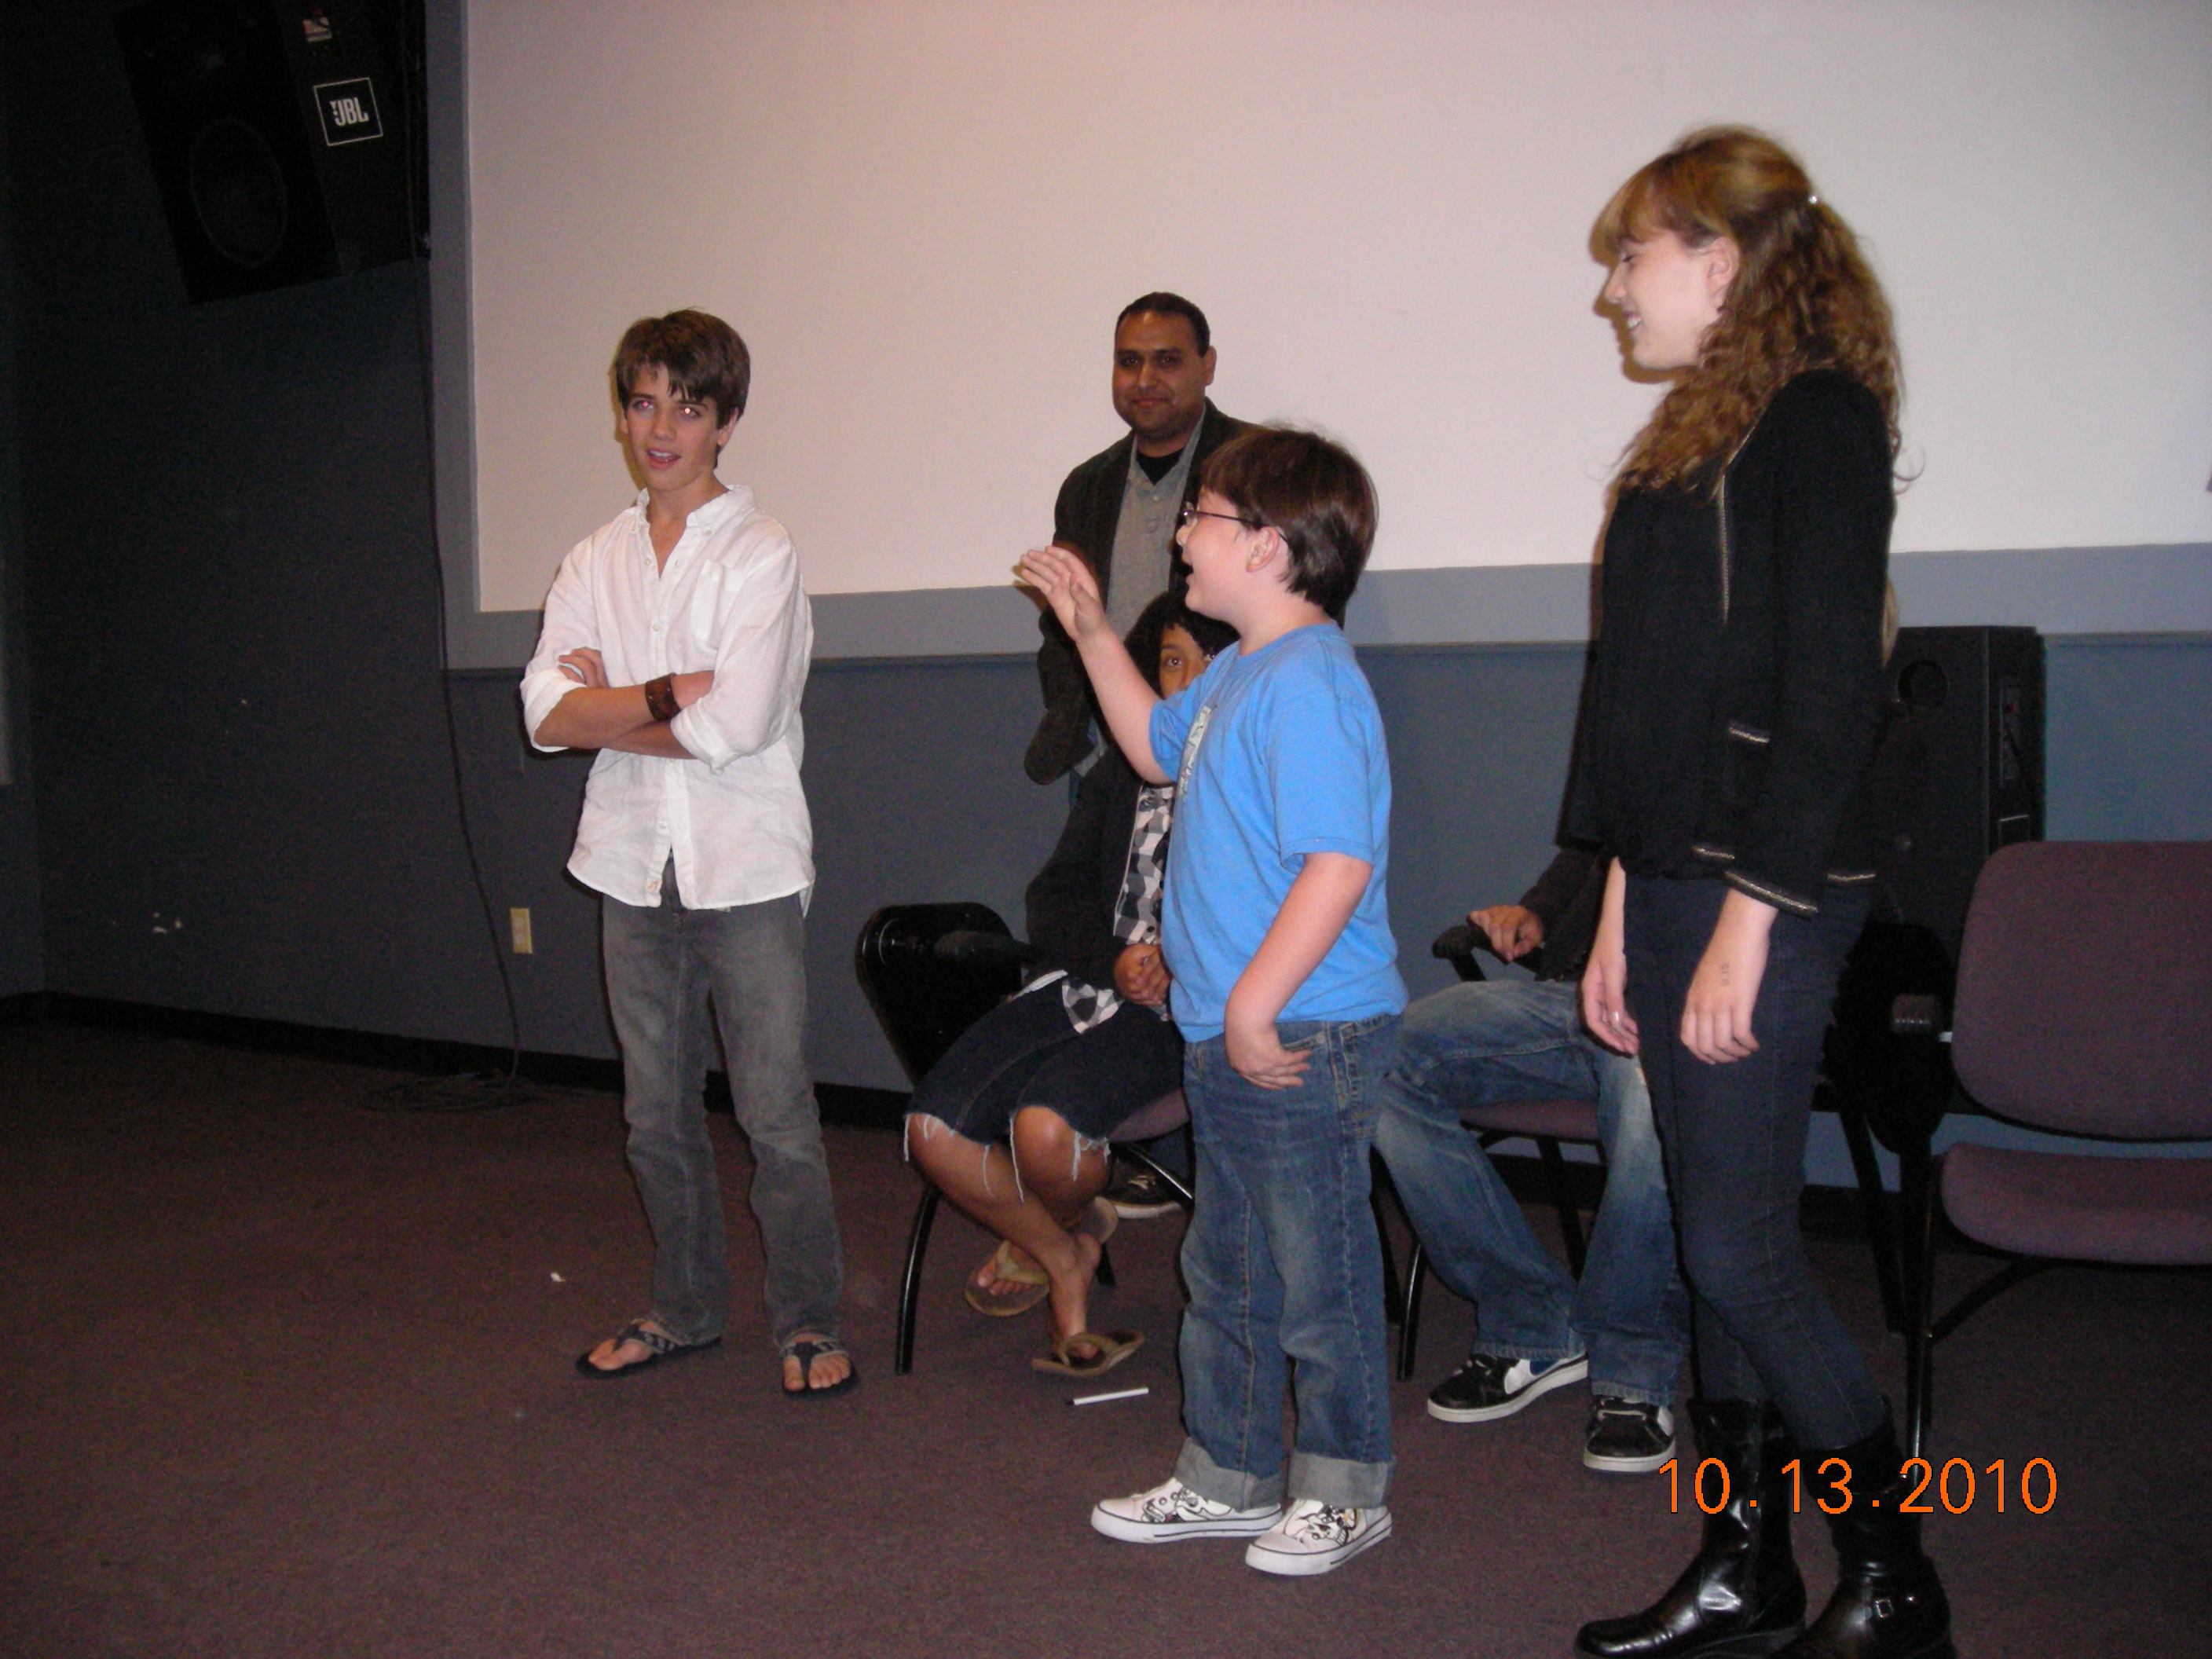 Matthew Wayne answers a question, after a private screening of the short film: WURM. October, 2010.